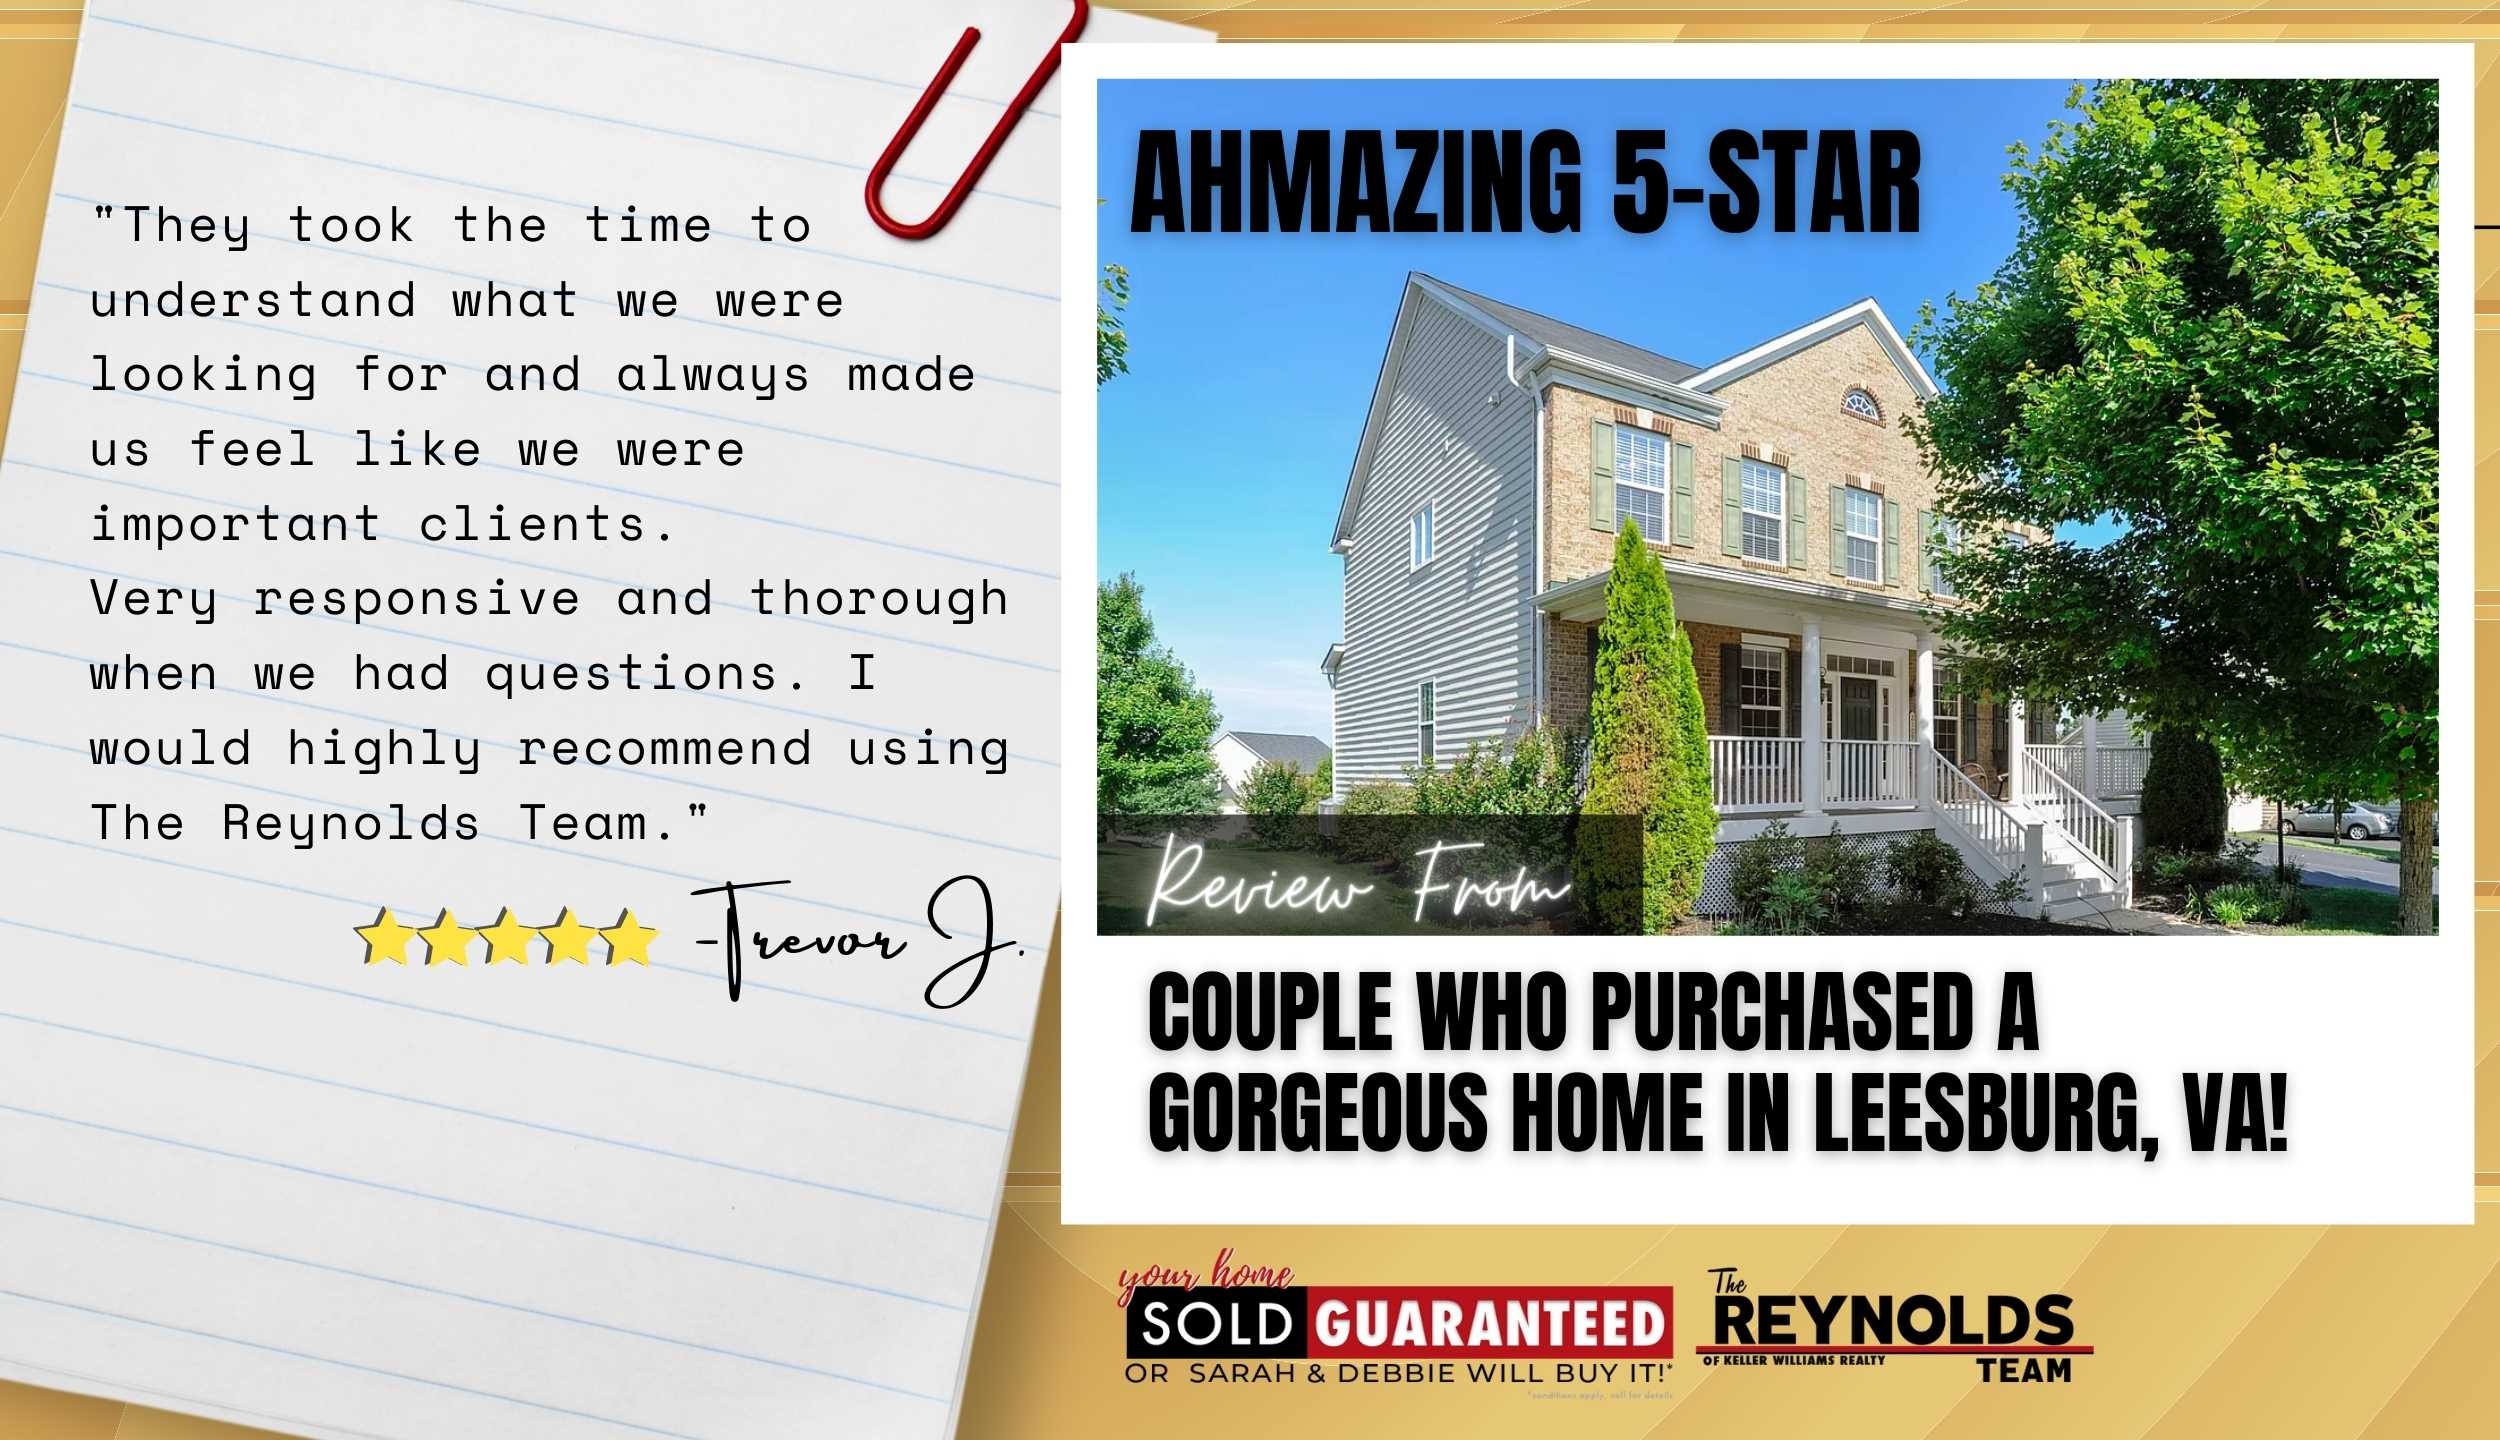 AHMAZING 5-Star Review From Couple Who Purchased A GORGEOUS Home in Leesburg, VA!